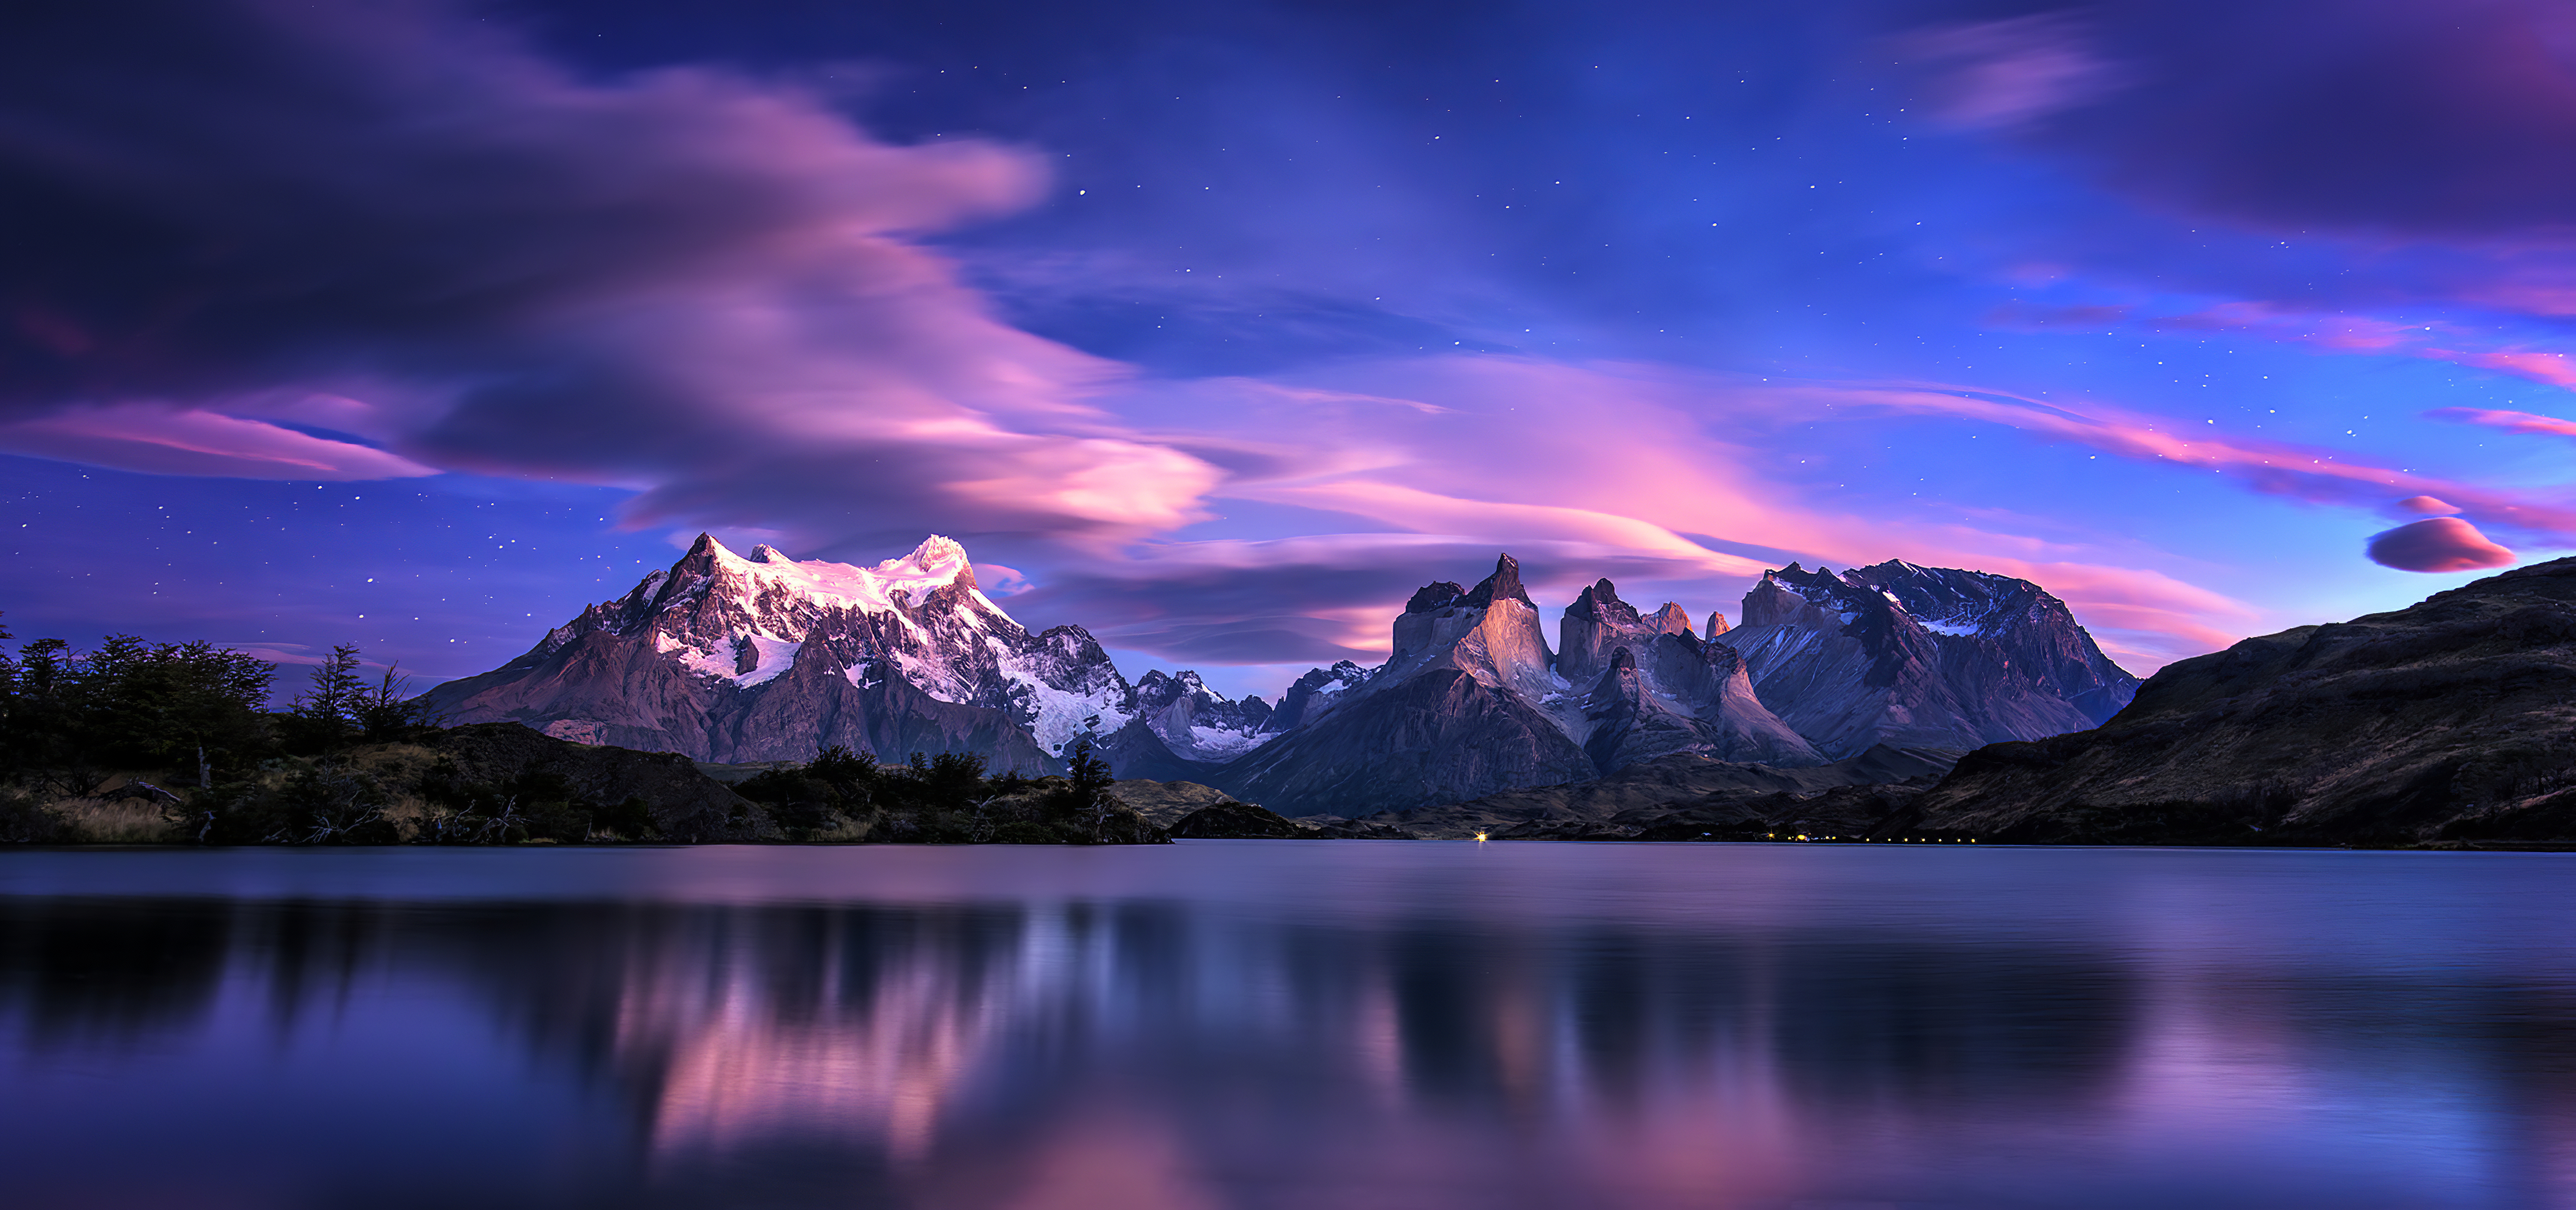 General 3440x1616 Timothy Poulton landscape mountains long exposure lake stars clouds low light sky night